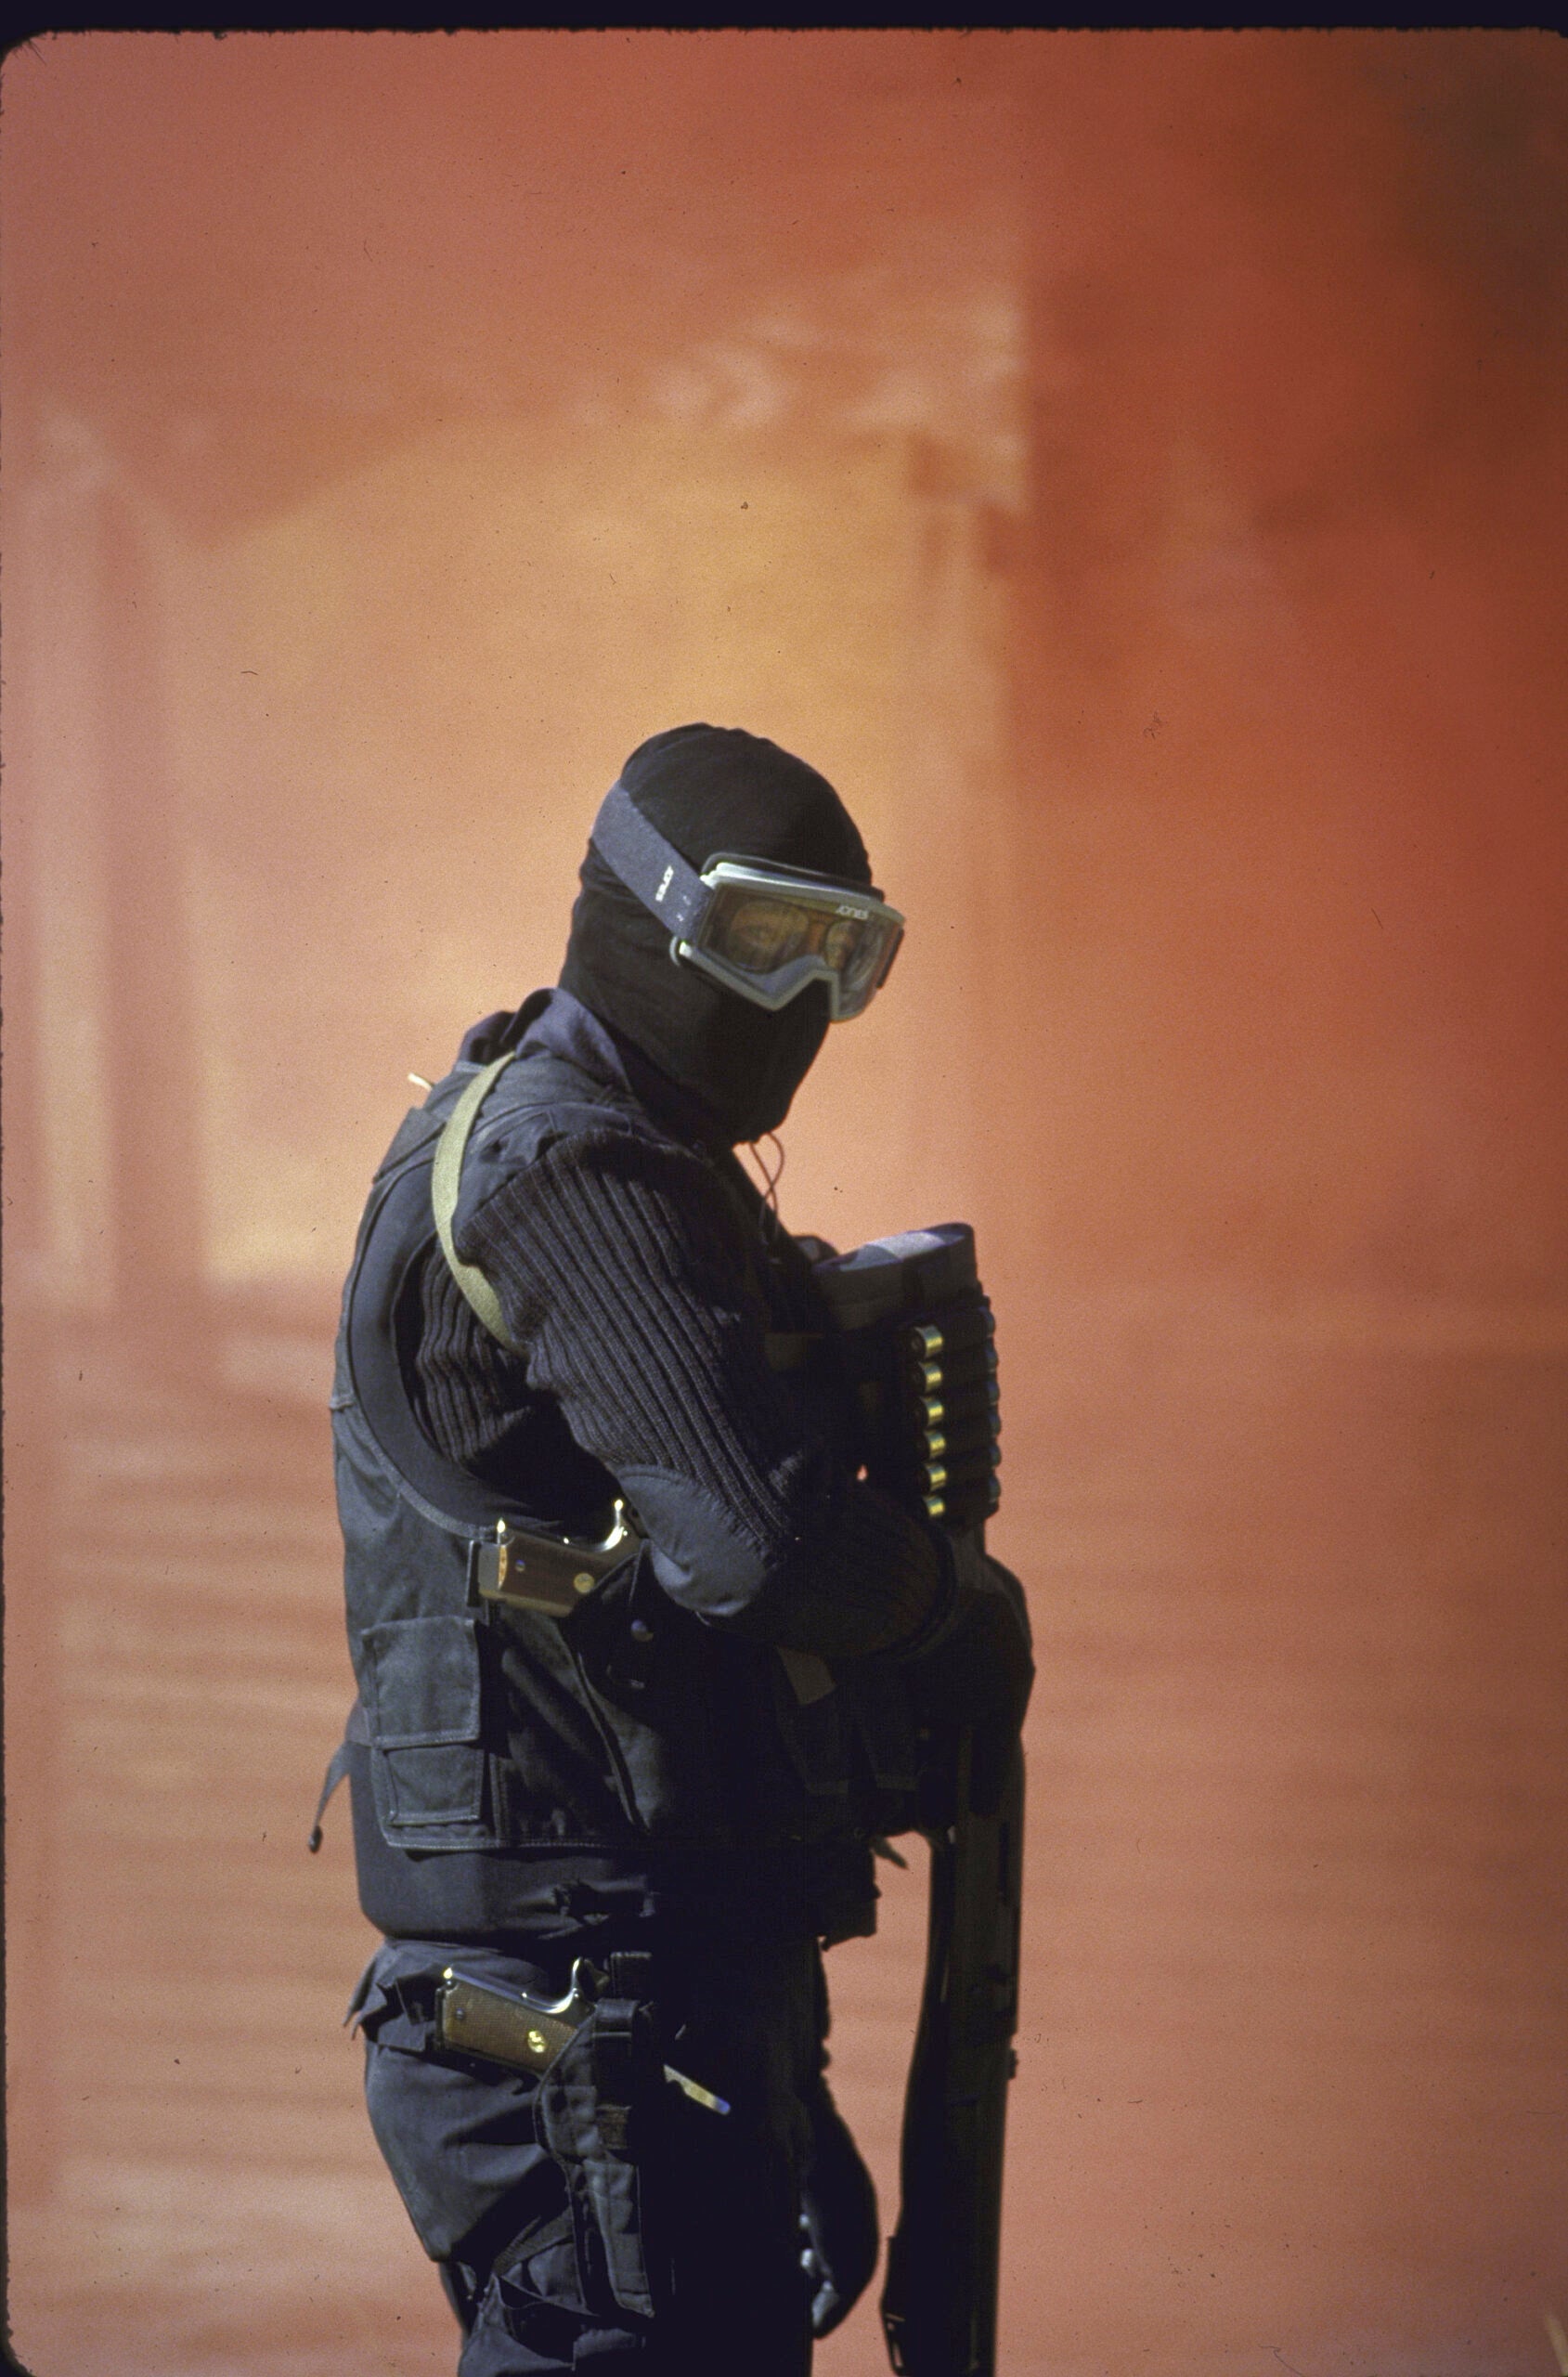 The Department of Energy had a nuclear commando task force in the 1980s that looked straight out of ‘Counter Strike’